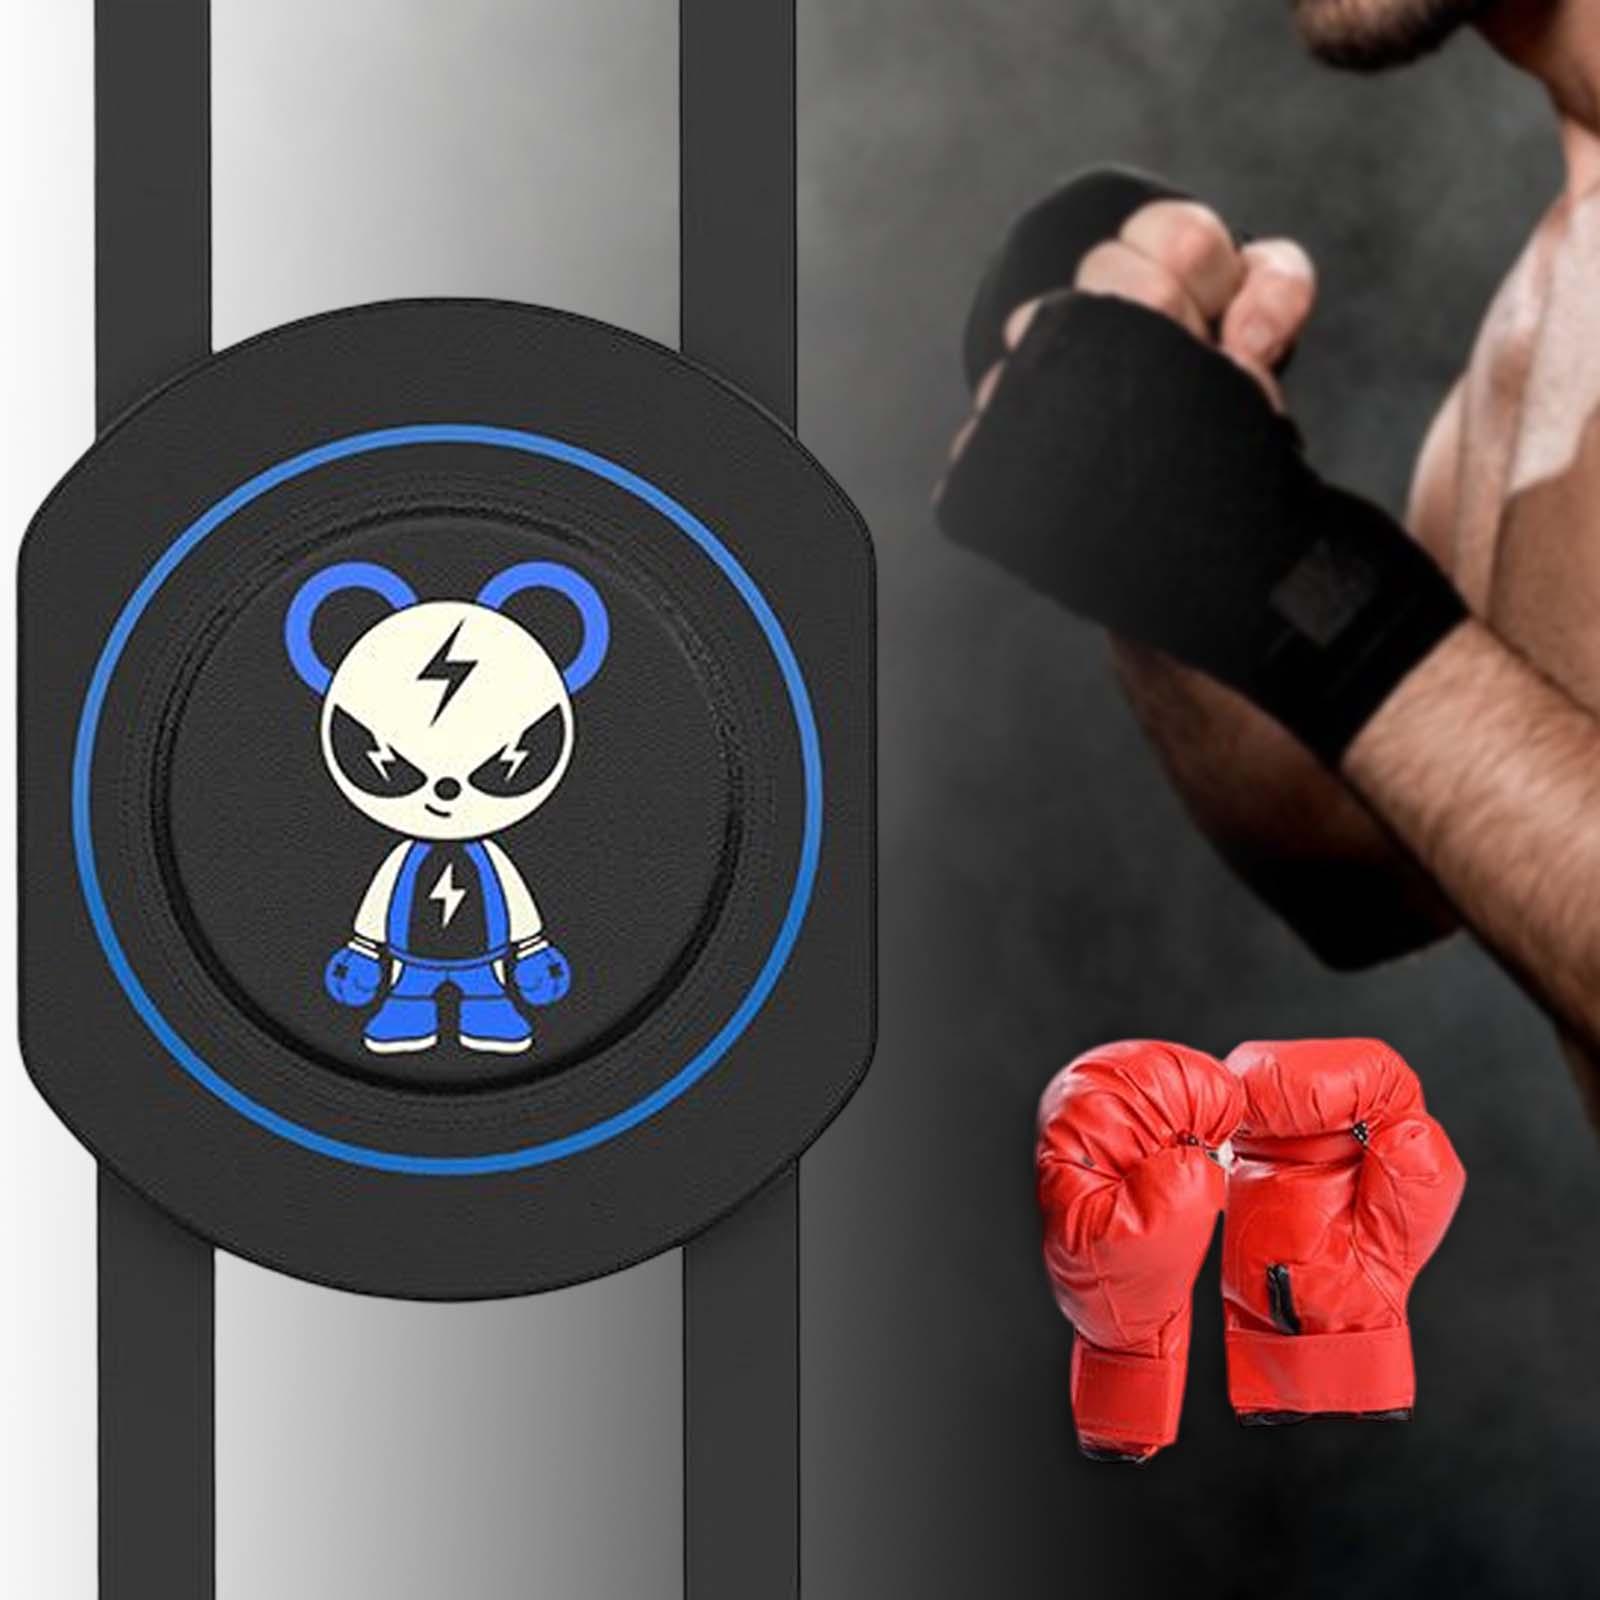 Punching Bag Homes Karate Competition Fitness Training Pad Boxing Wall Target Bear With Kids Glove